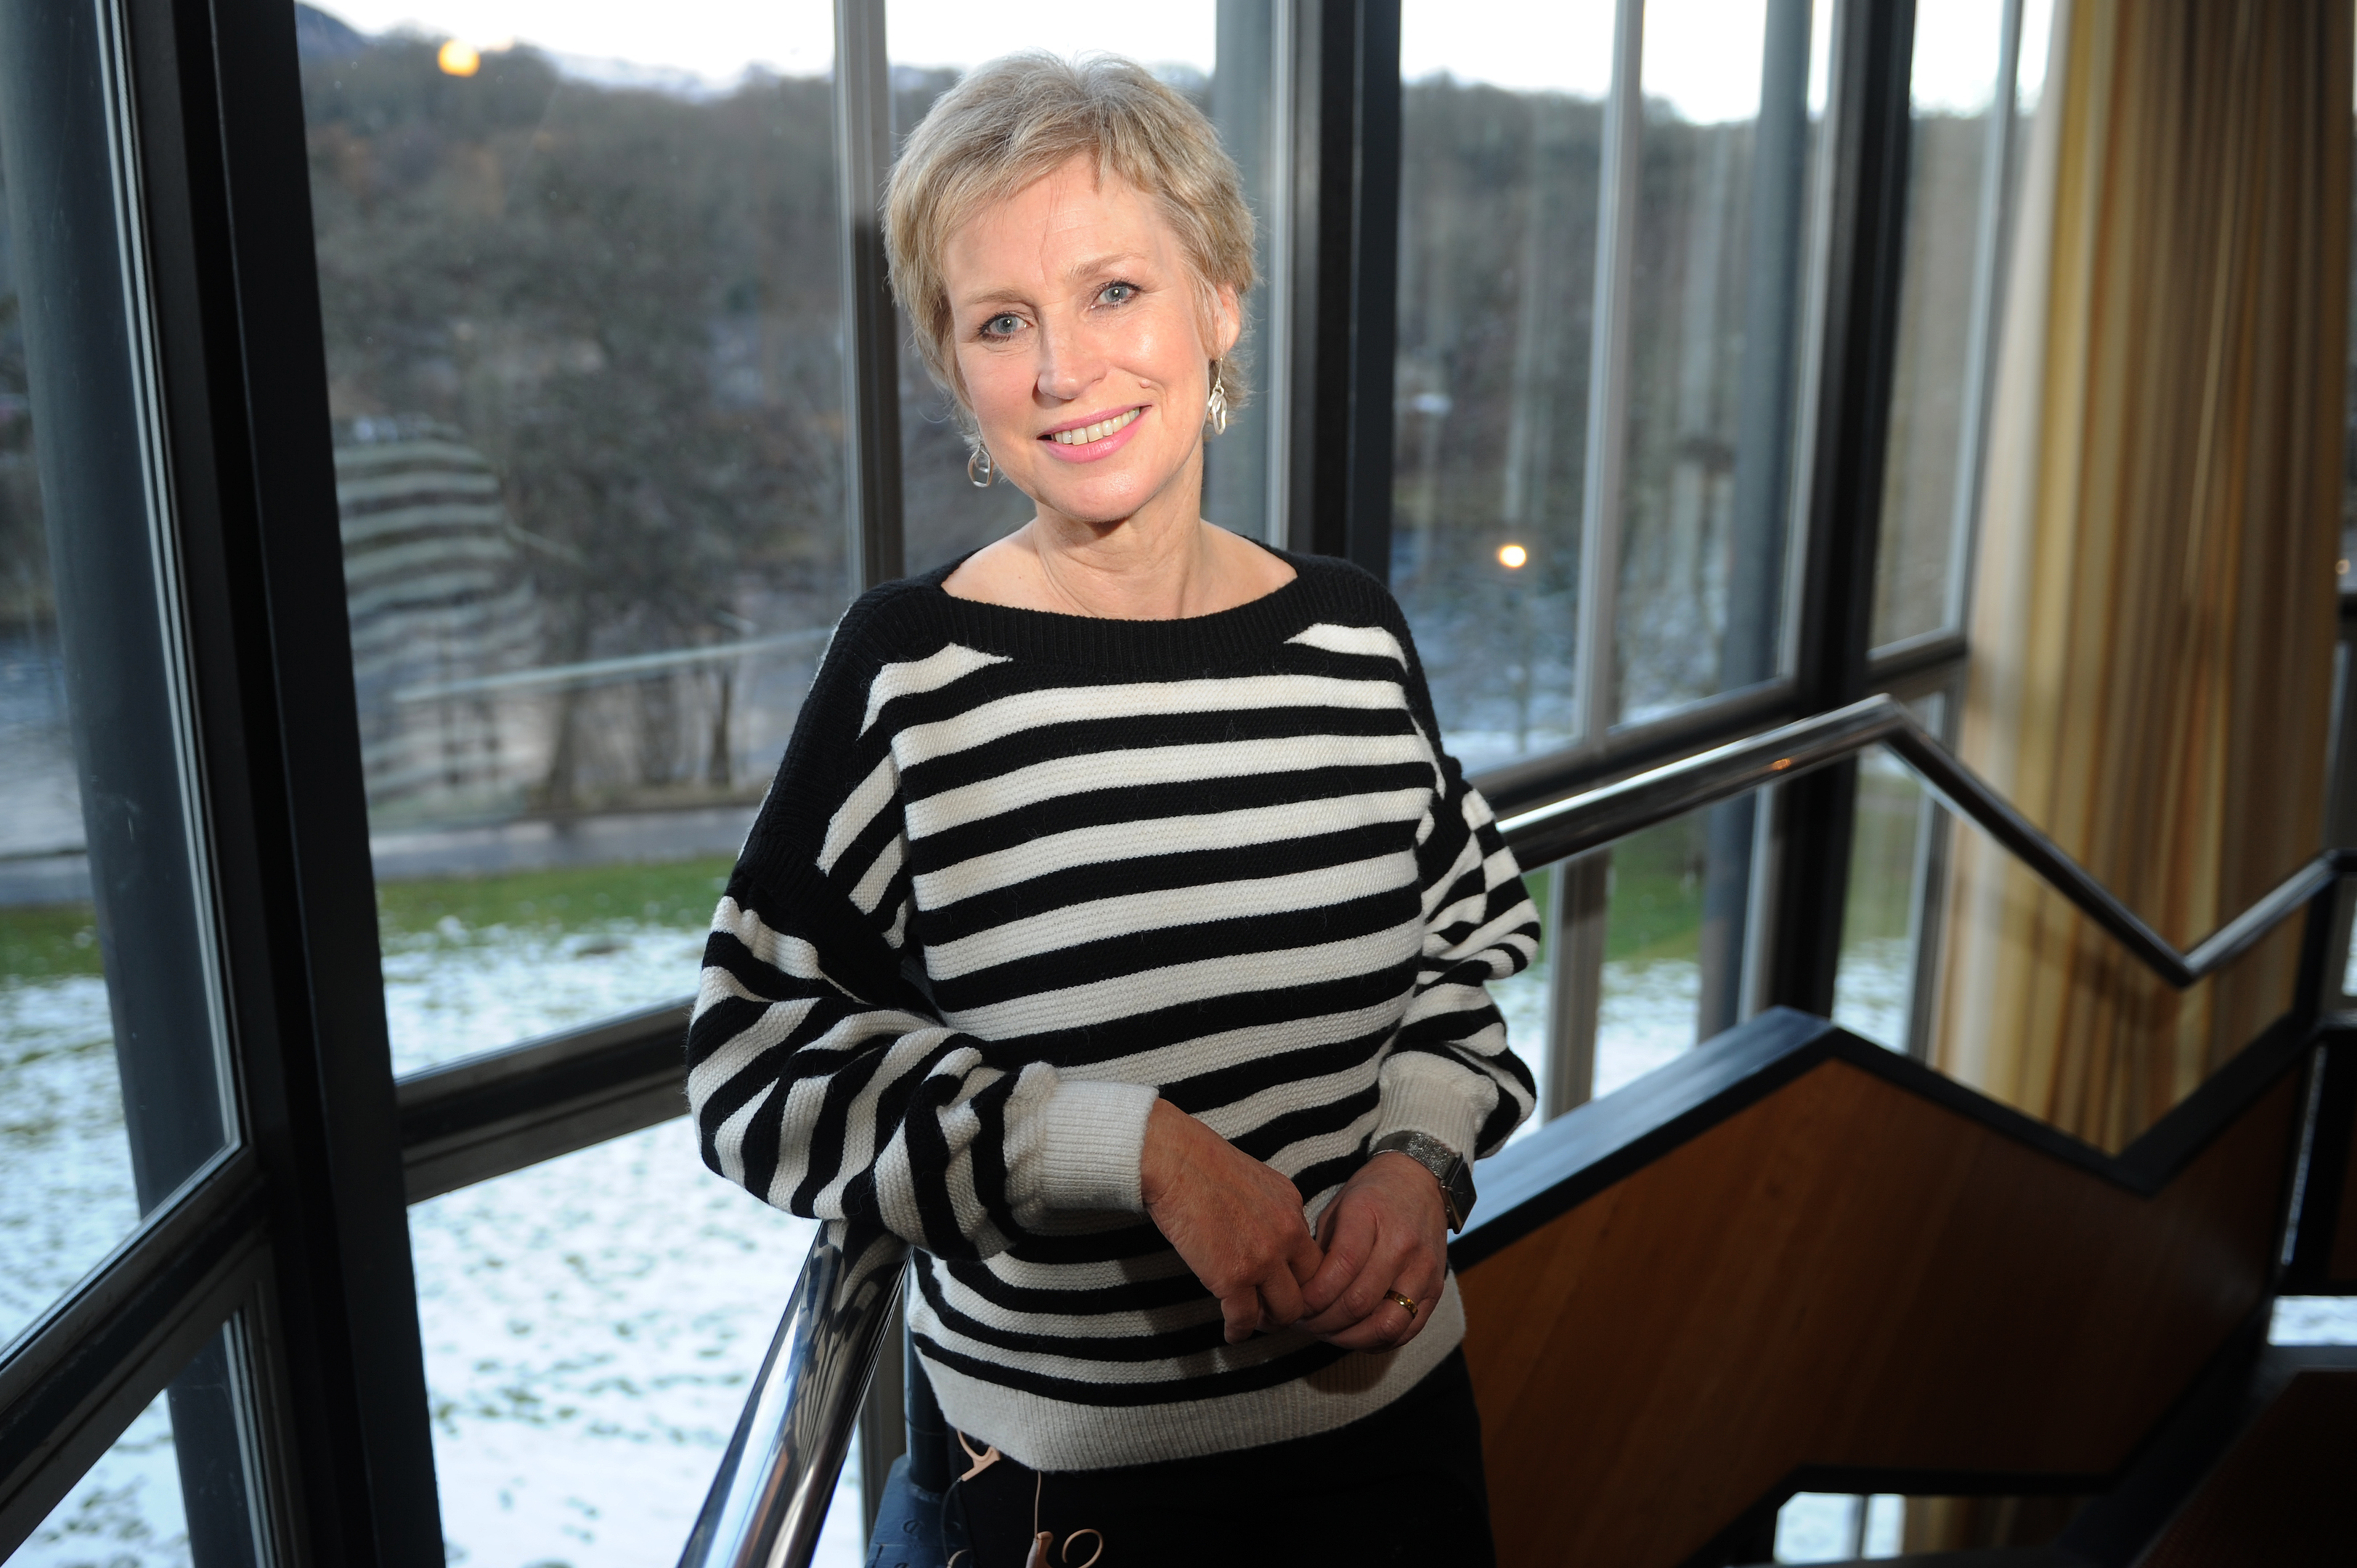 Sally Magnusson founded the Playlist for Life programme in 2013